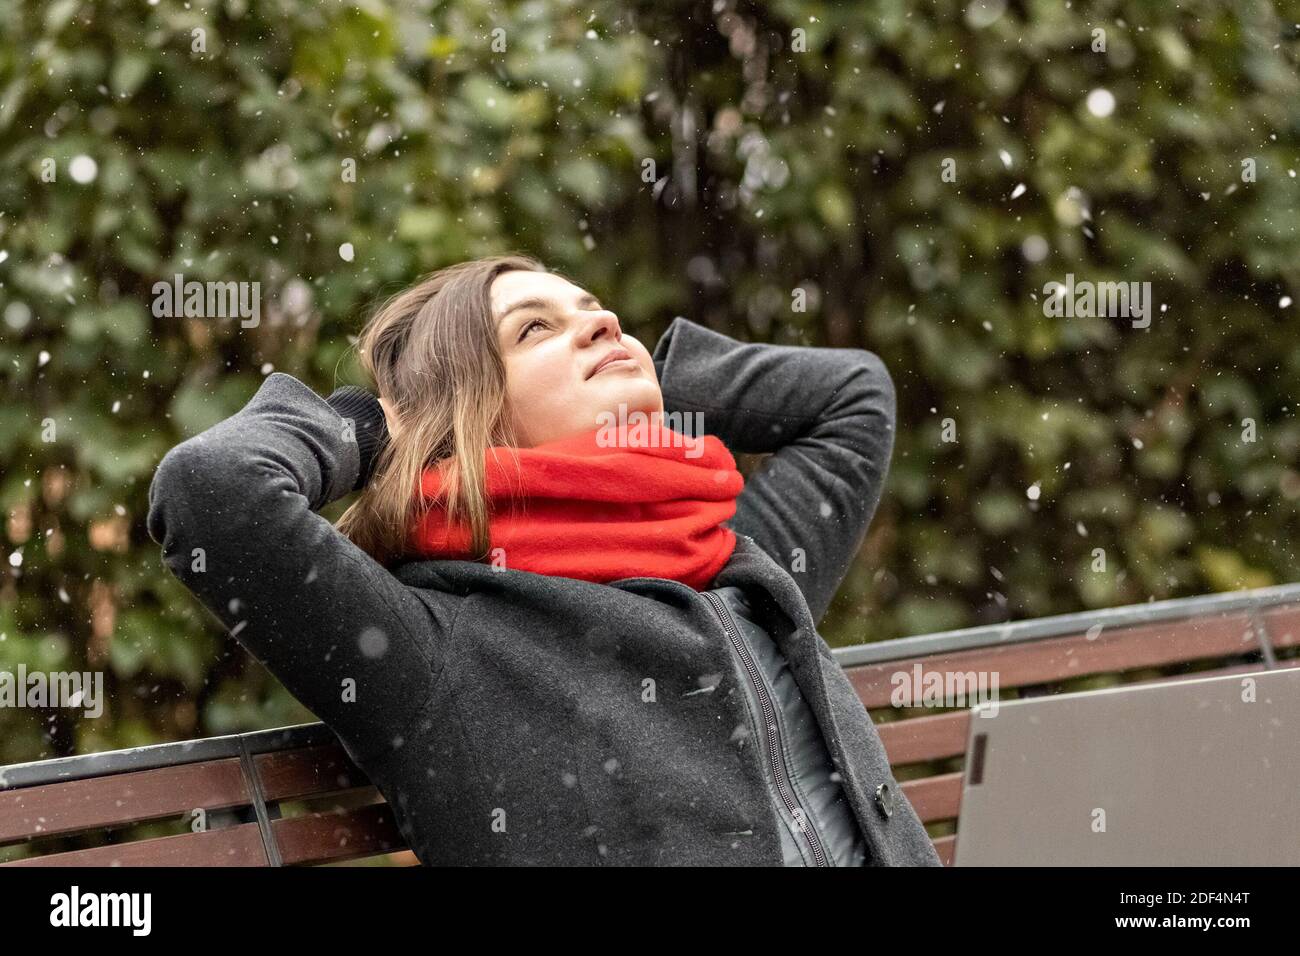 A young woman, with her hands behind her head, feels peace, rests after work, sits on a wooden bench in the park a laptop on her knees. Break during w Stock Photo